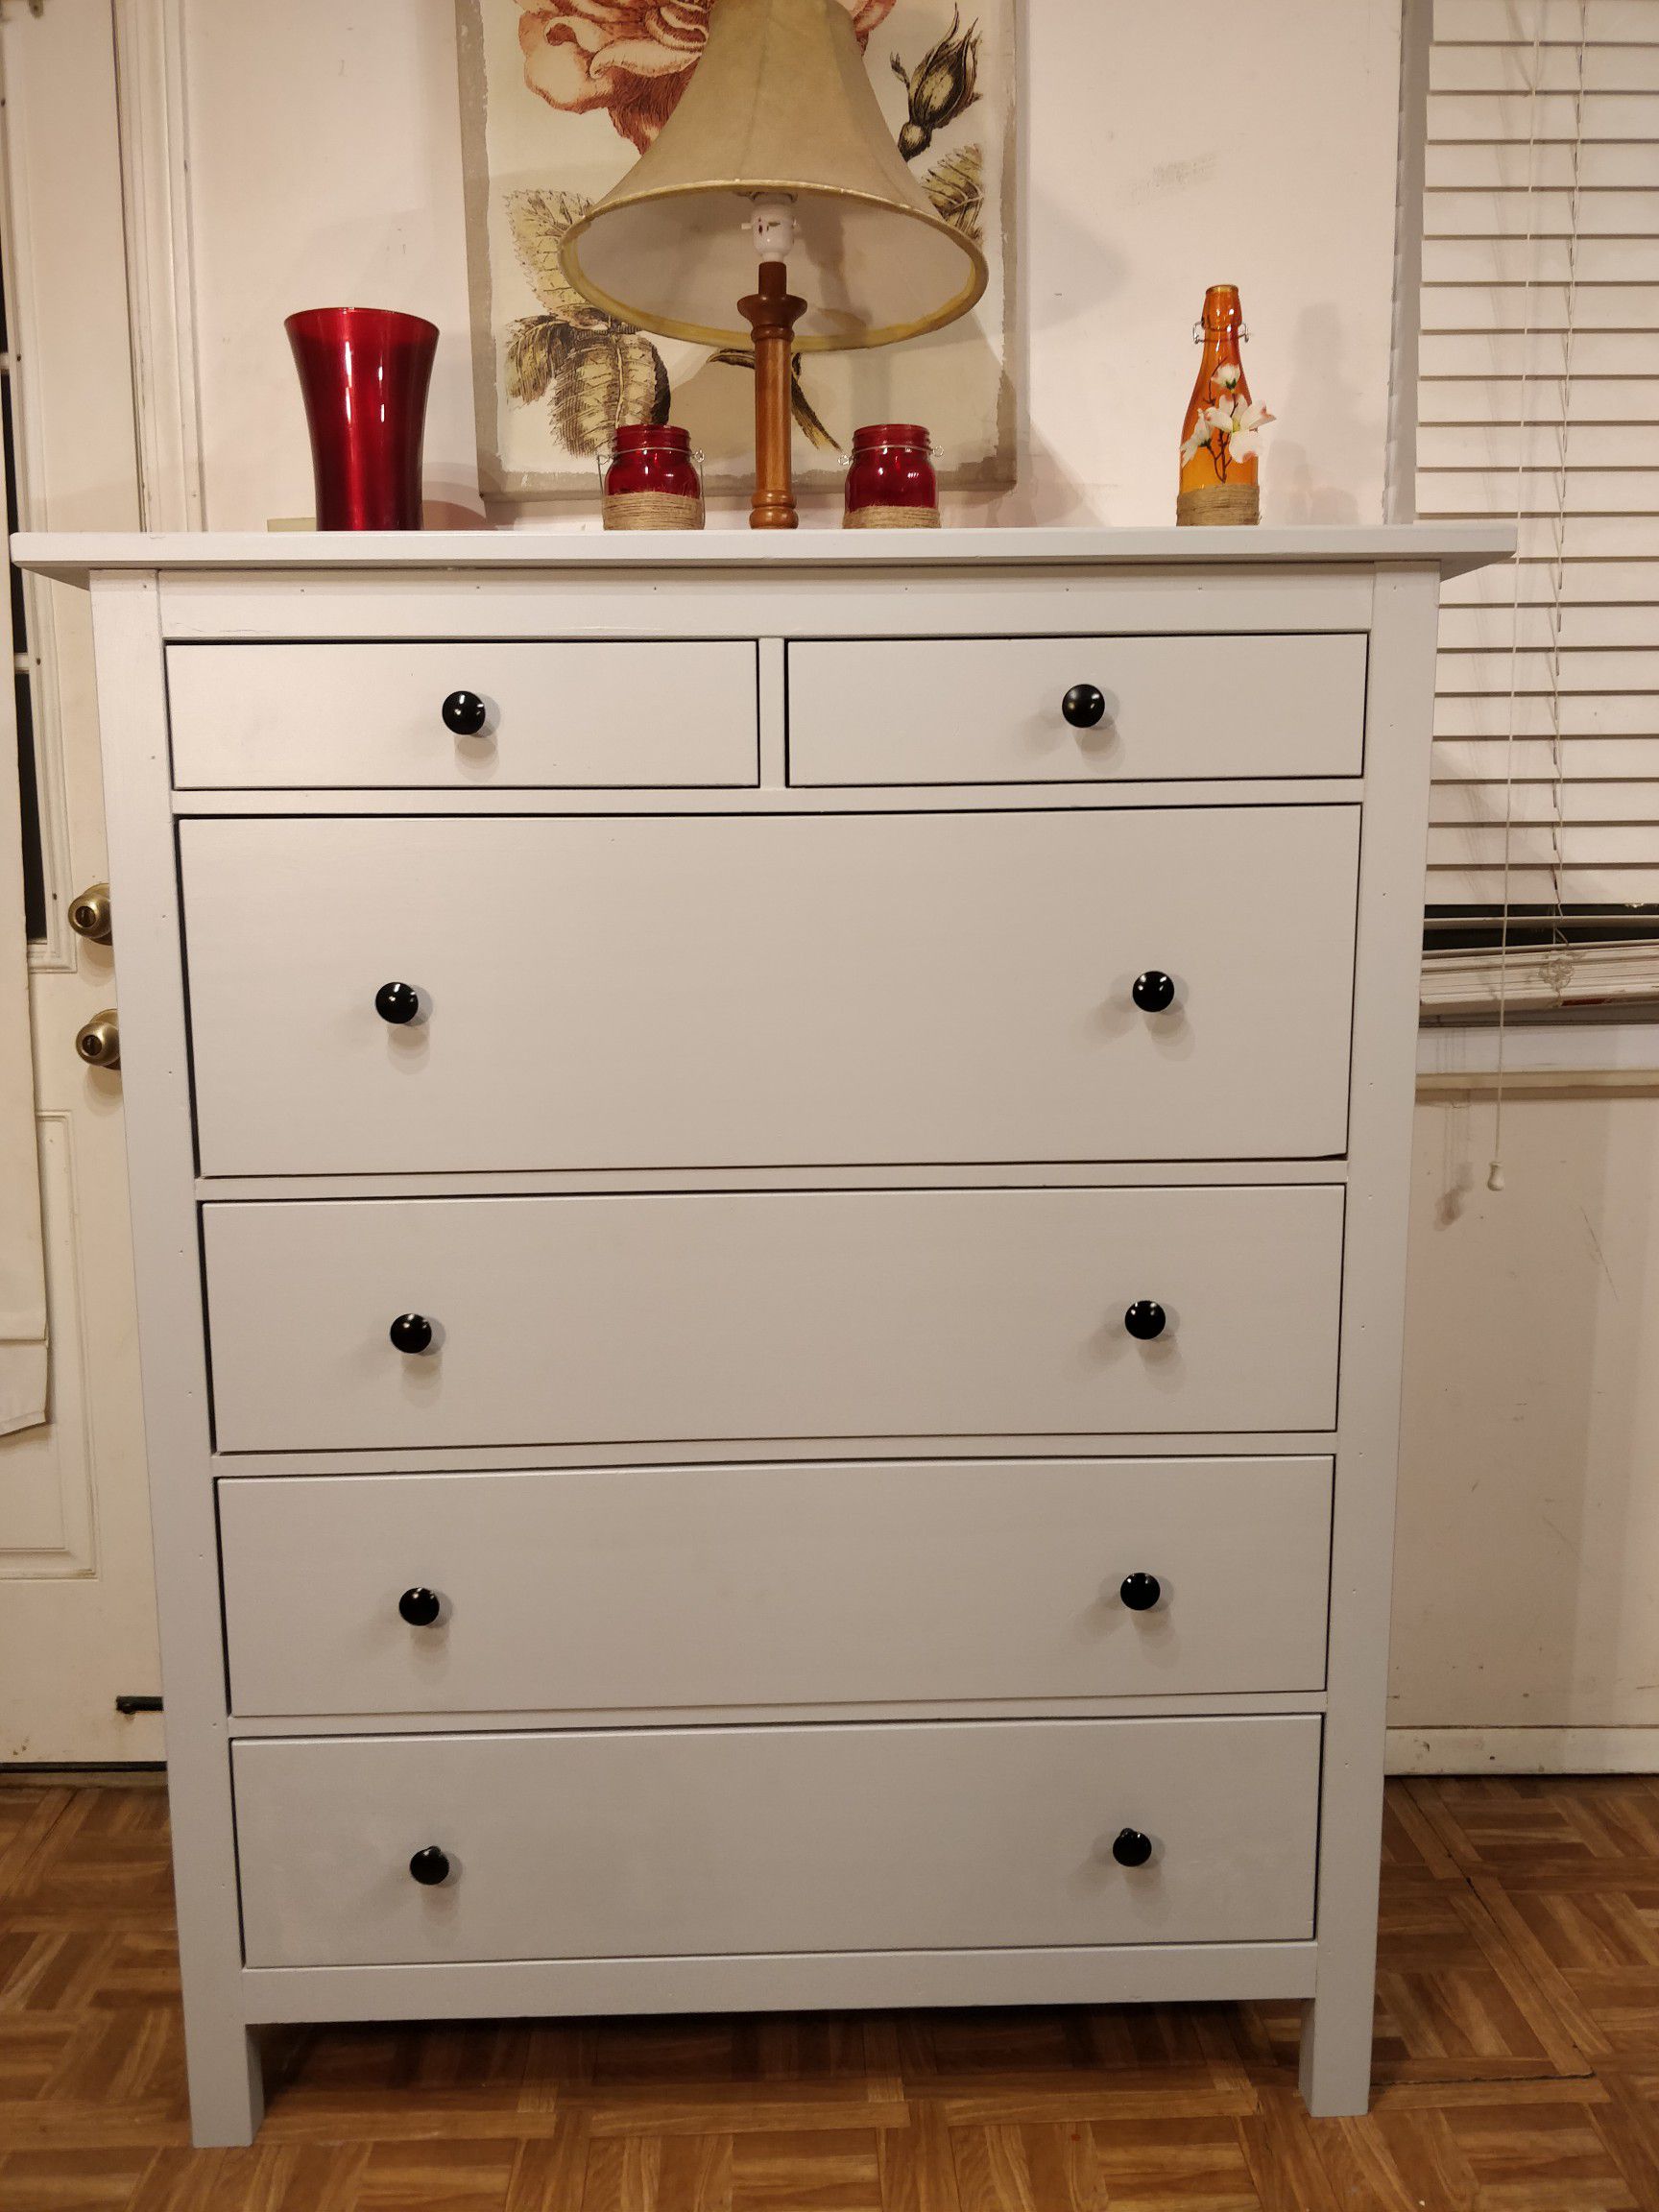 Light grey Wooden big tall boy dresser with big drawers in great condition, all drawers working well. L34.4"*W20"*H52"